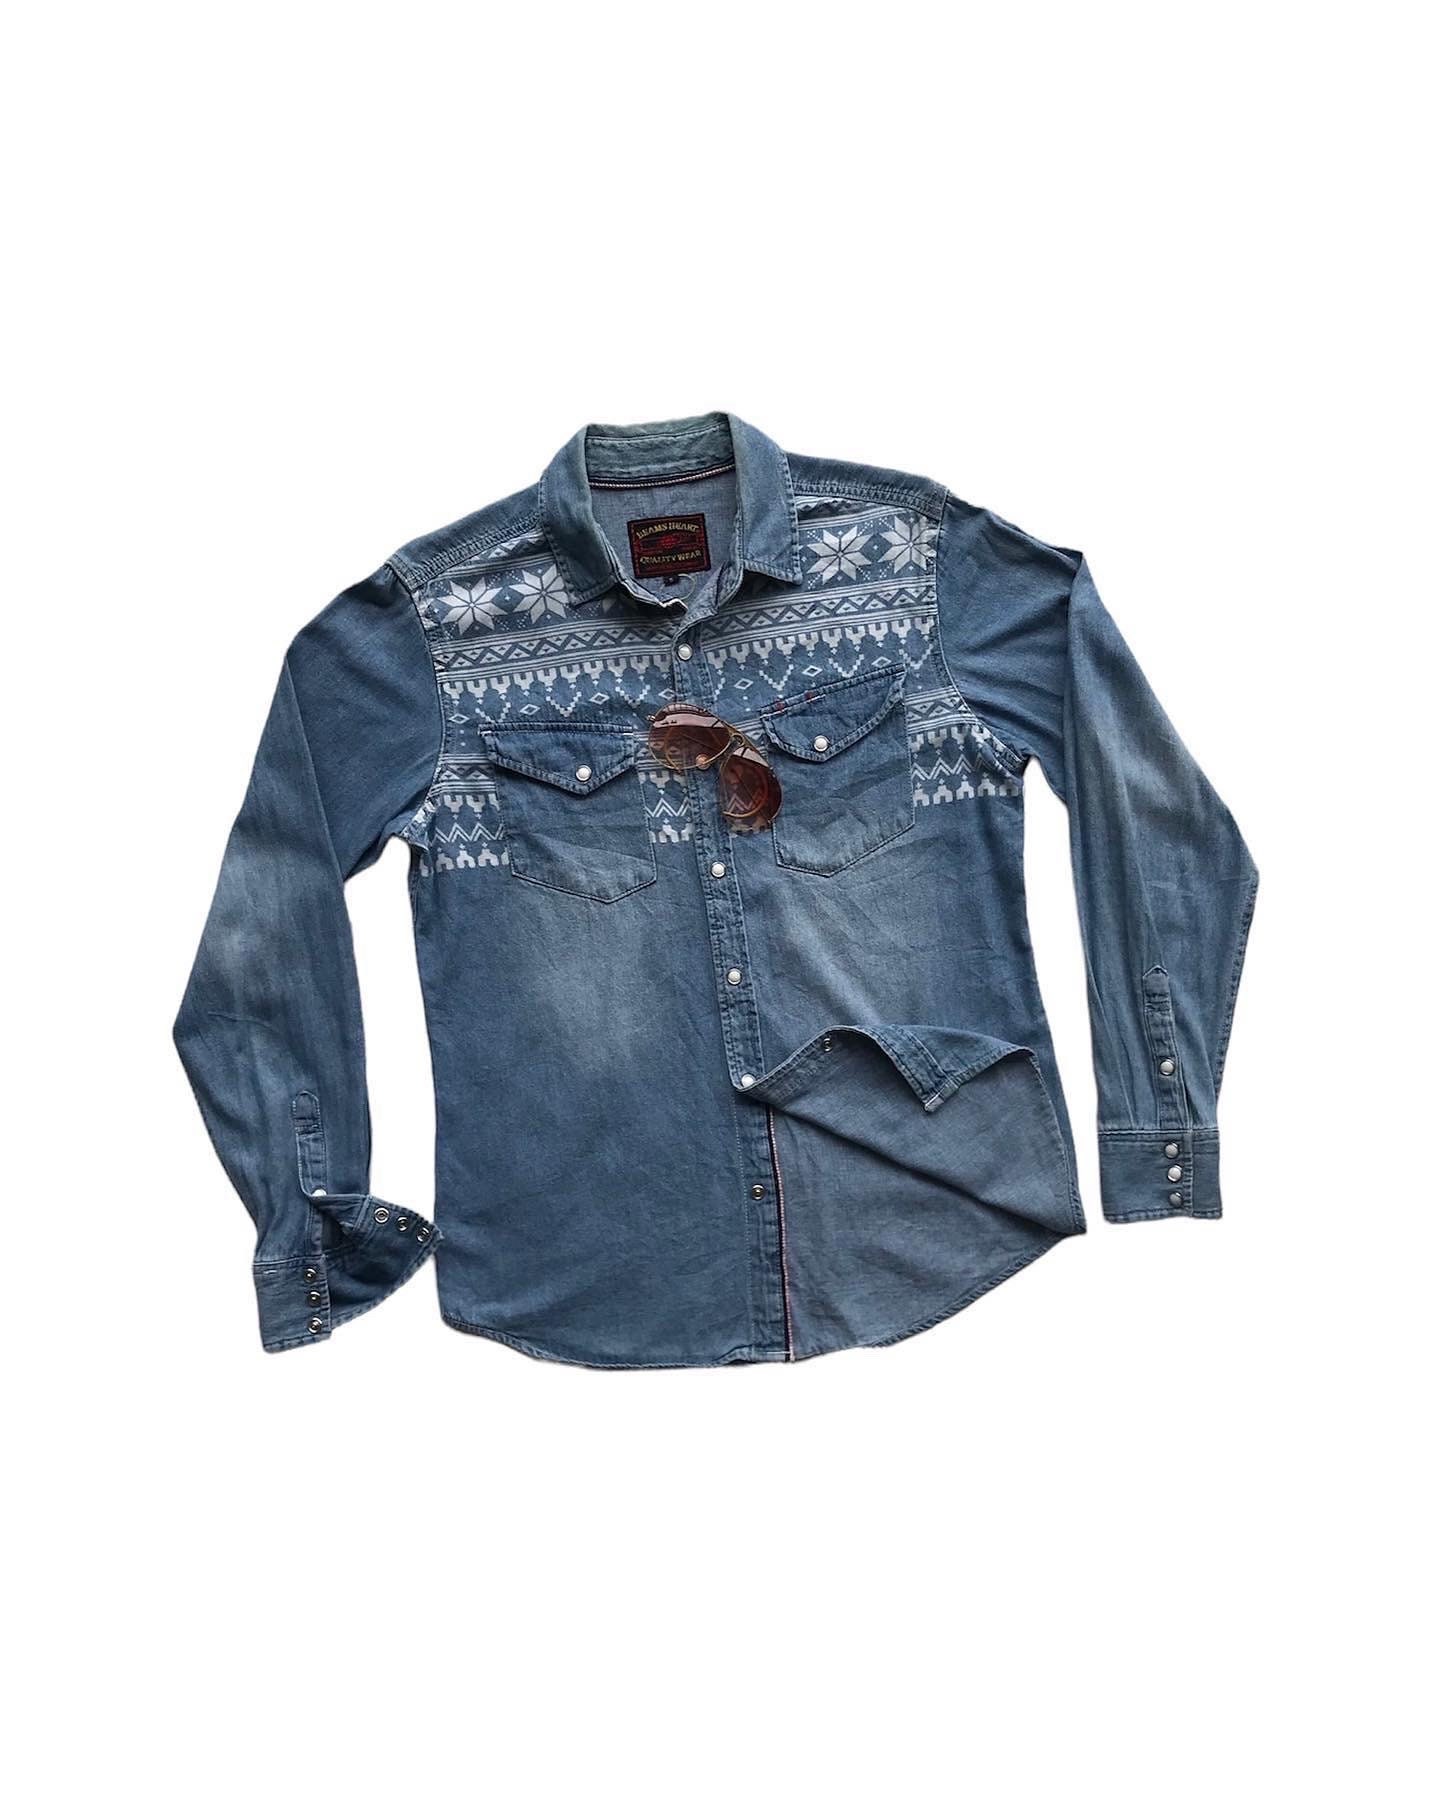 best denim shirts for men | The Style Guide